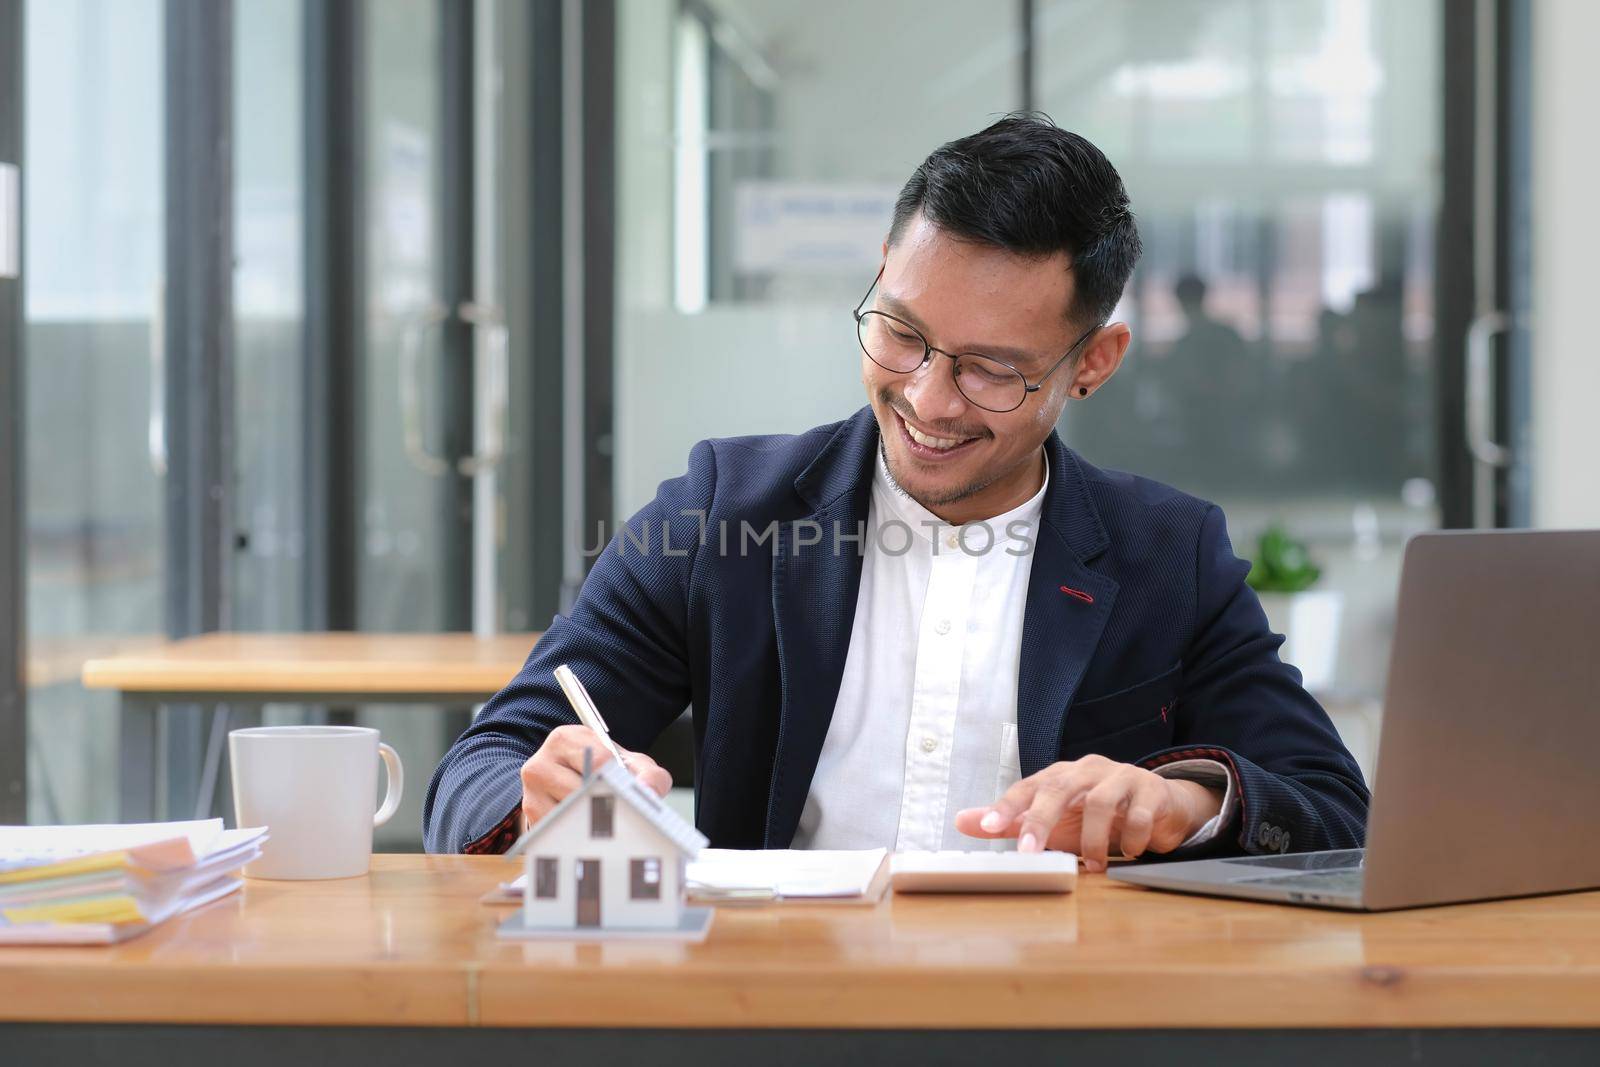 House model with agent business man signs a purchase contract or mortgage for a home, buy and sell home insurance concerning mortgage loan Real estate concept..